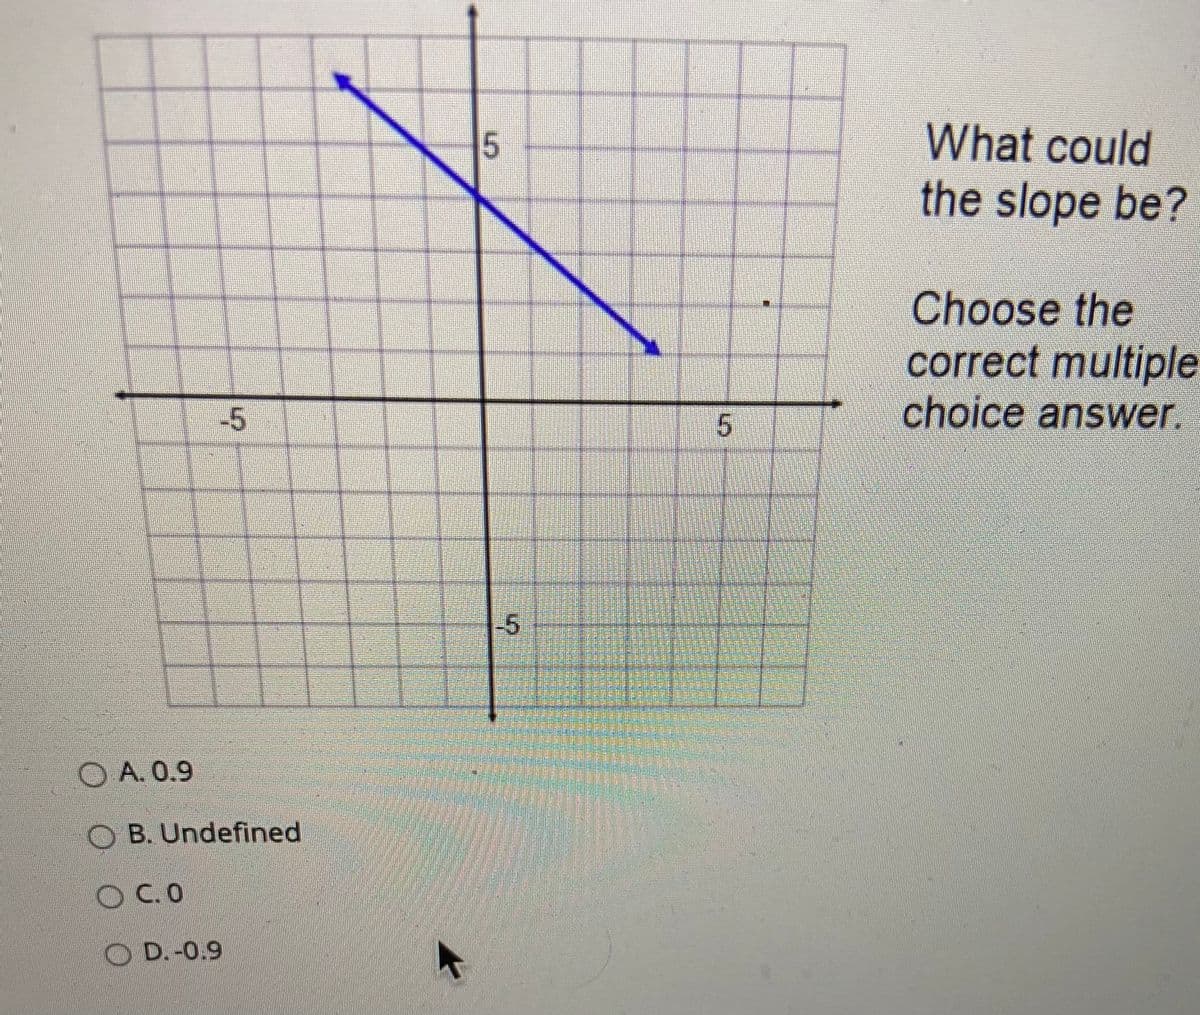 What could
the slope be?
Choose the
correct multiple
-5
5.
choice answer.
-5
O A. 0.9
B. Undefined
OC.O
O D.-0.9
5.
